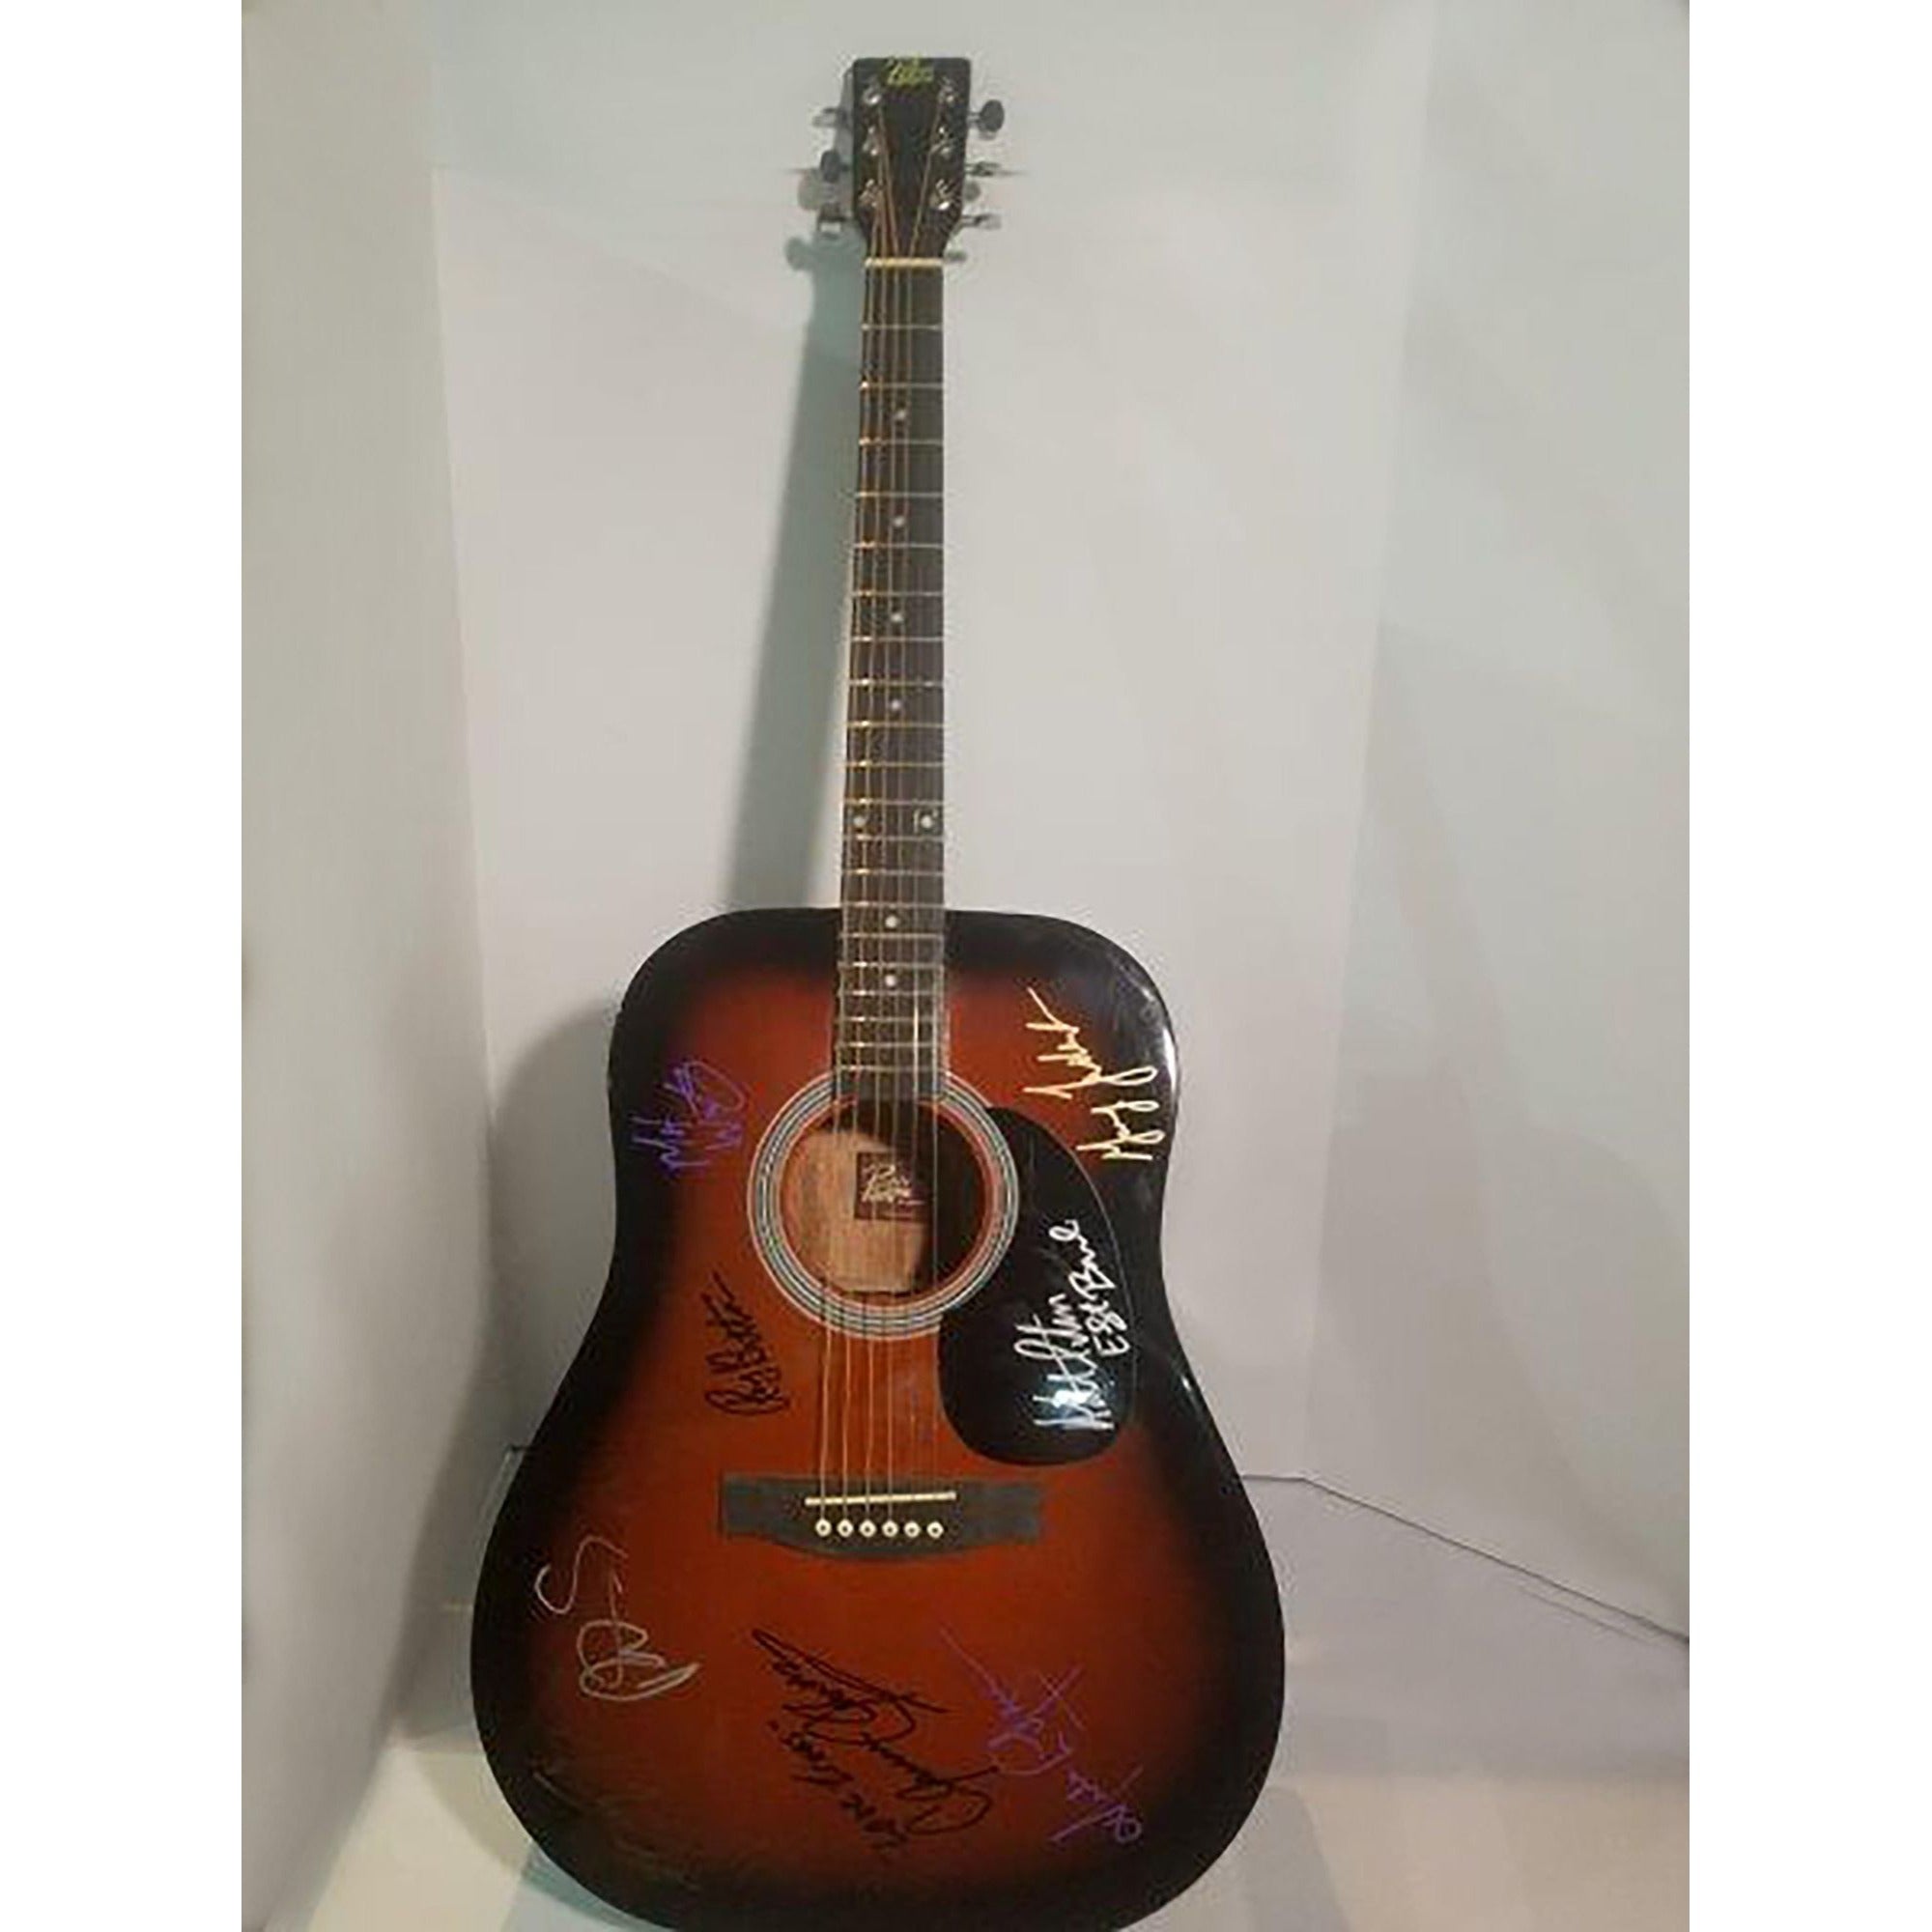 Bruce Springsteen, Clarence Clemons and the E street Band signed guitar with proof